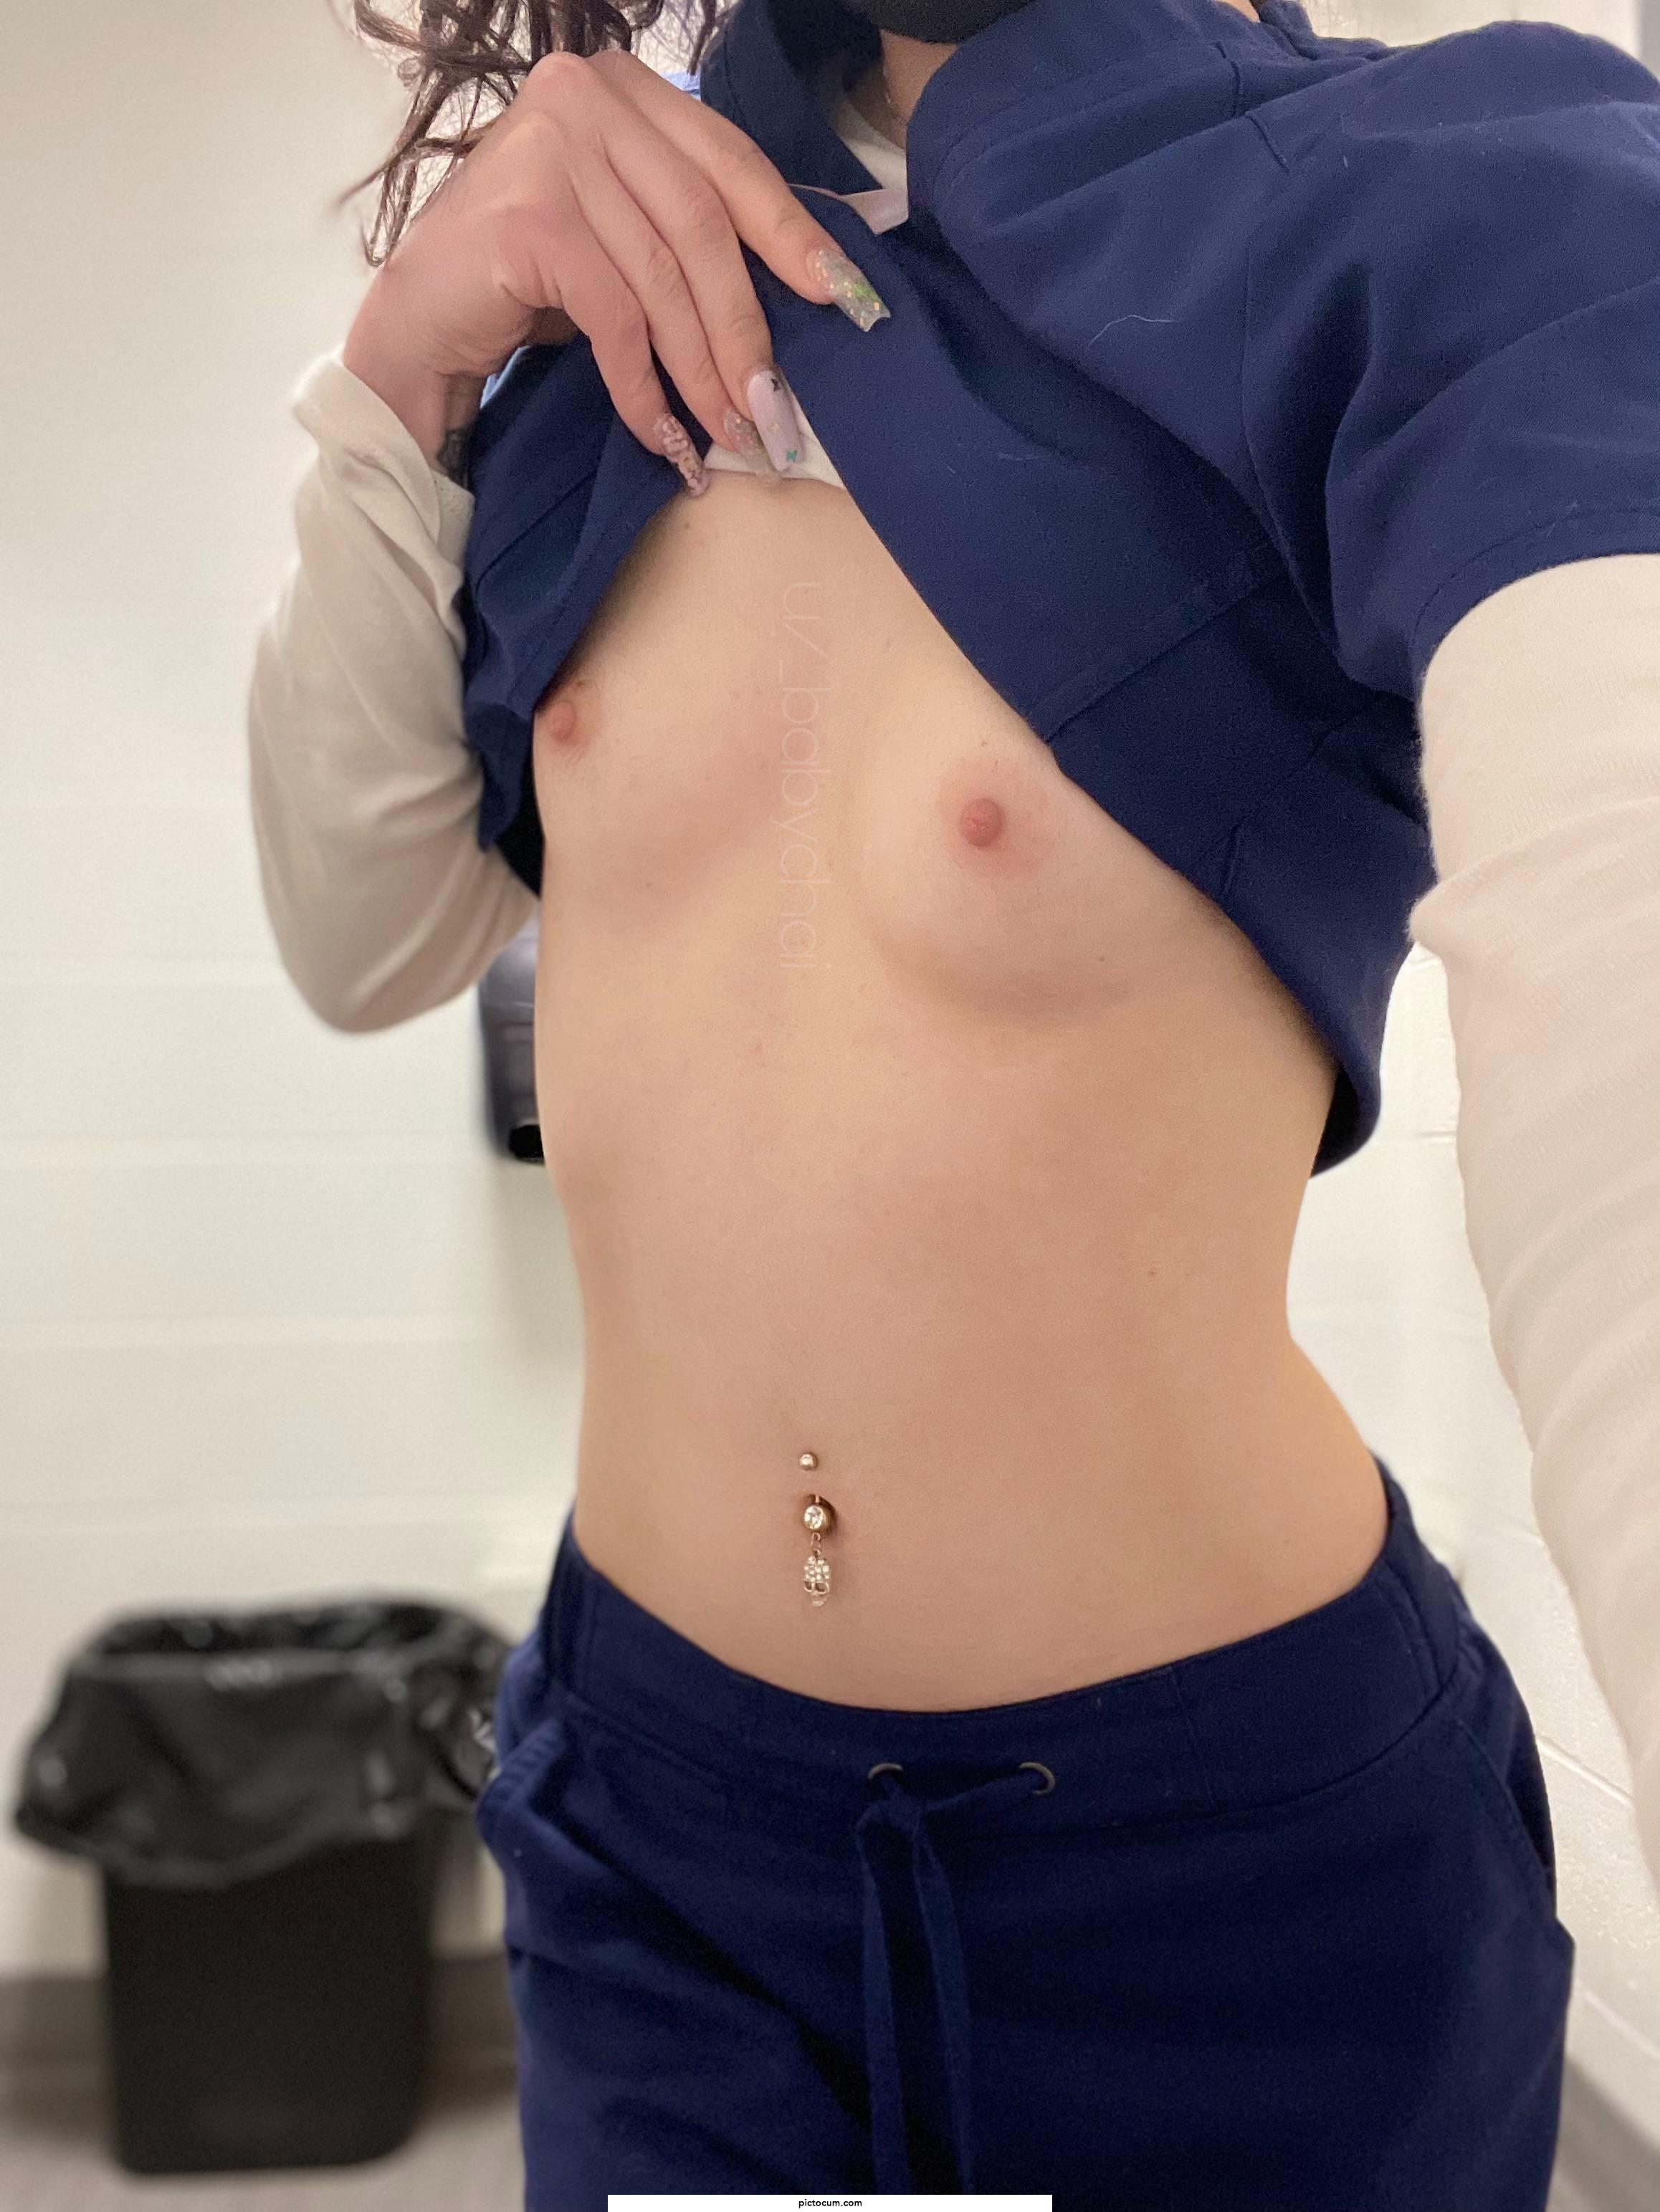 Small titty nurse says meet me in the bathroom for a secret meeting